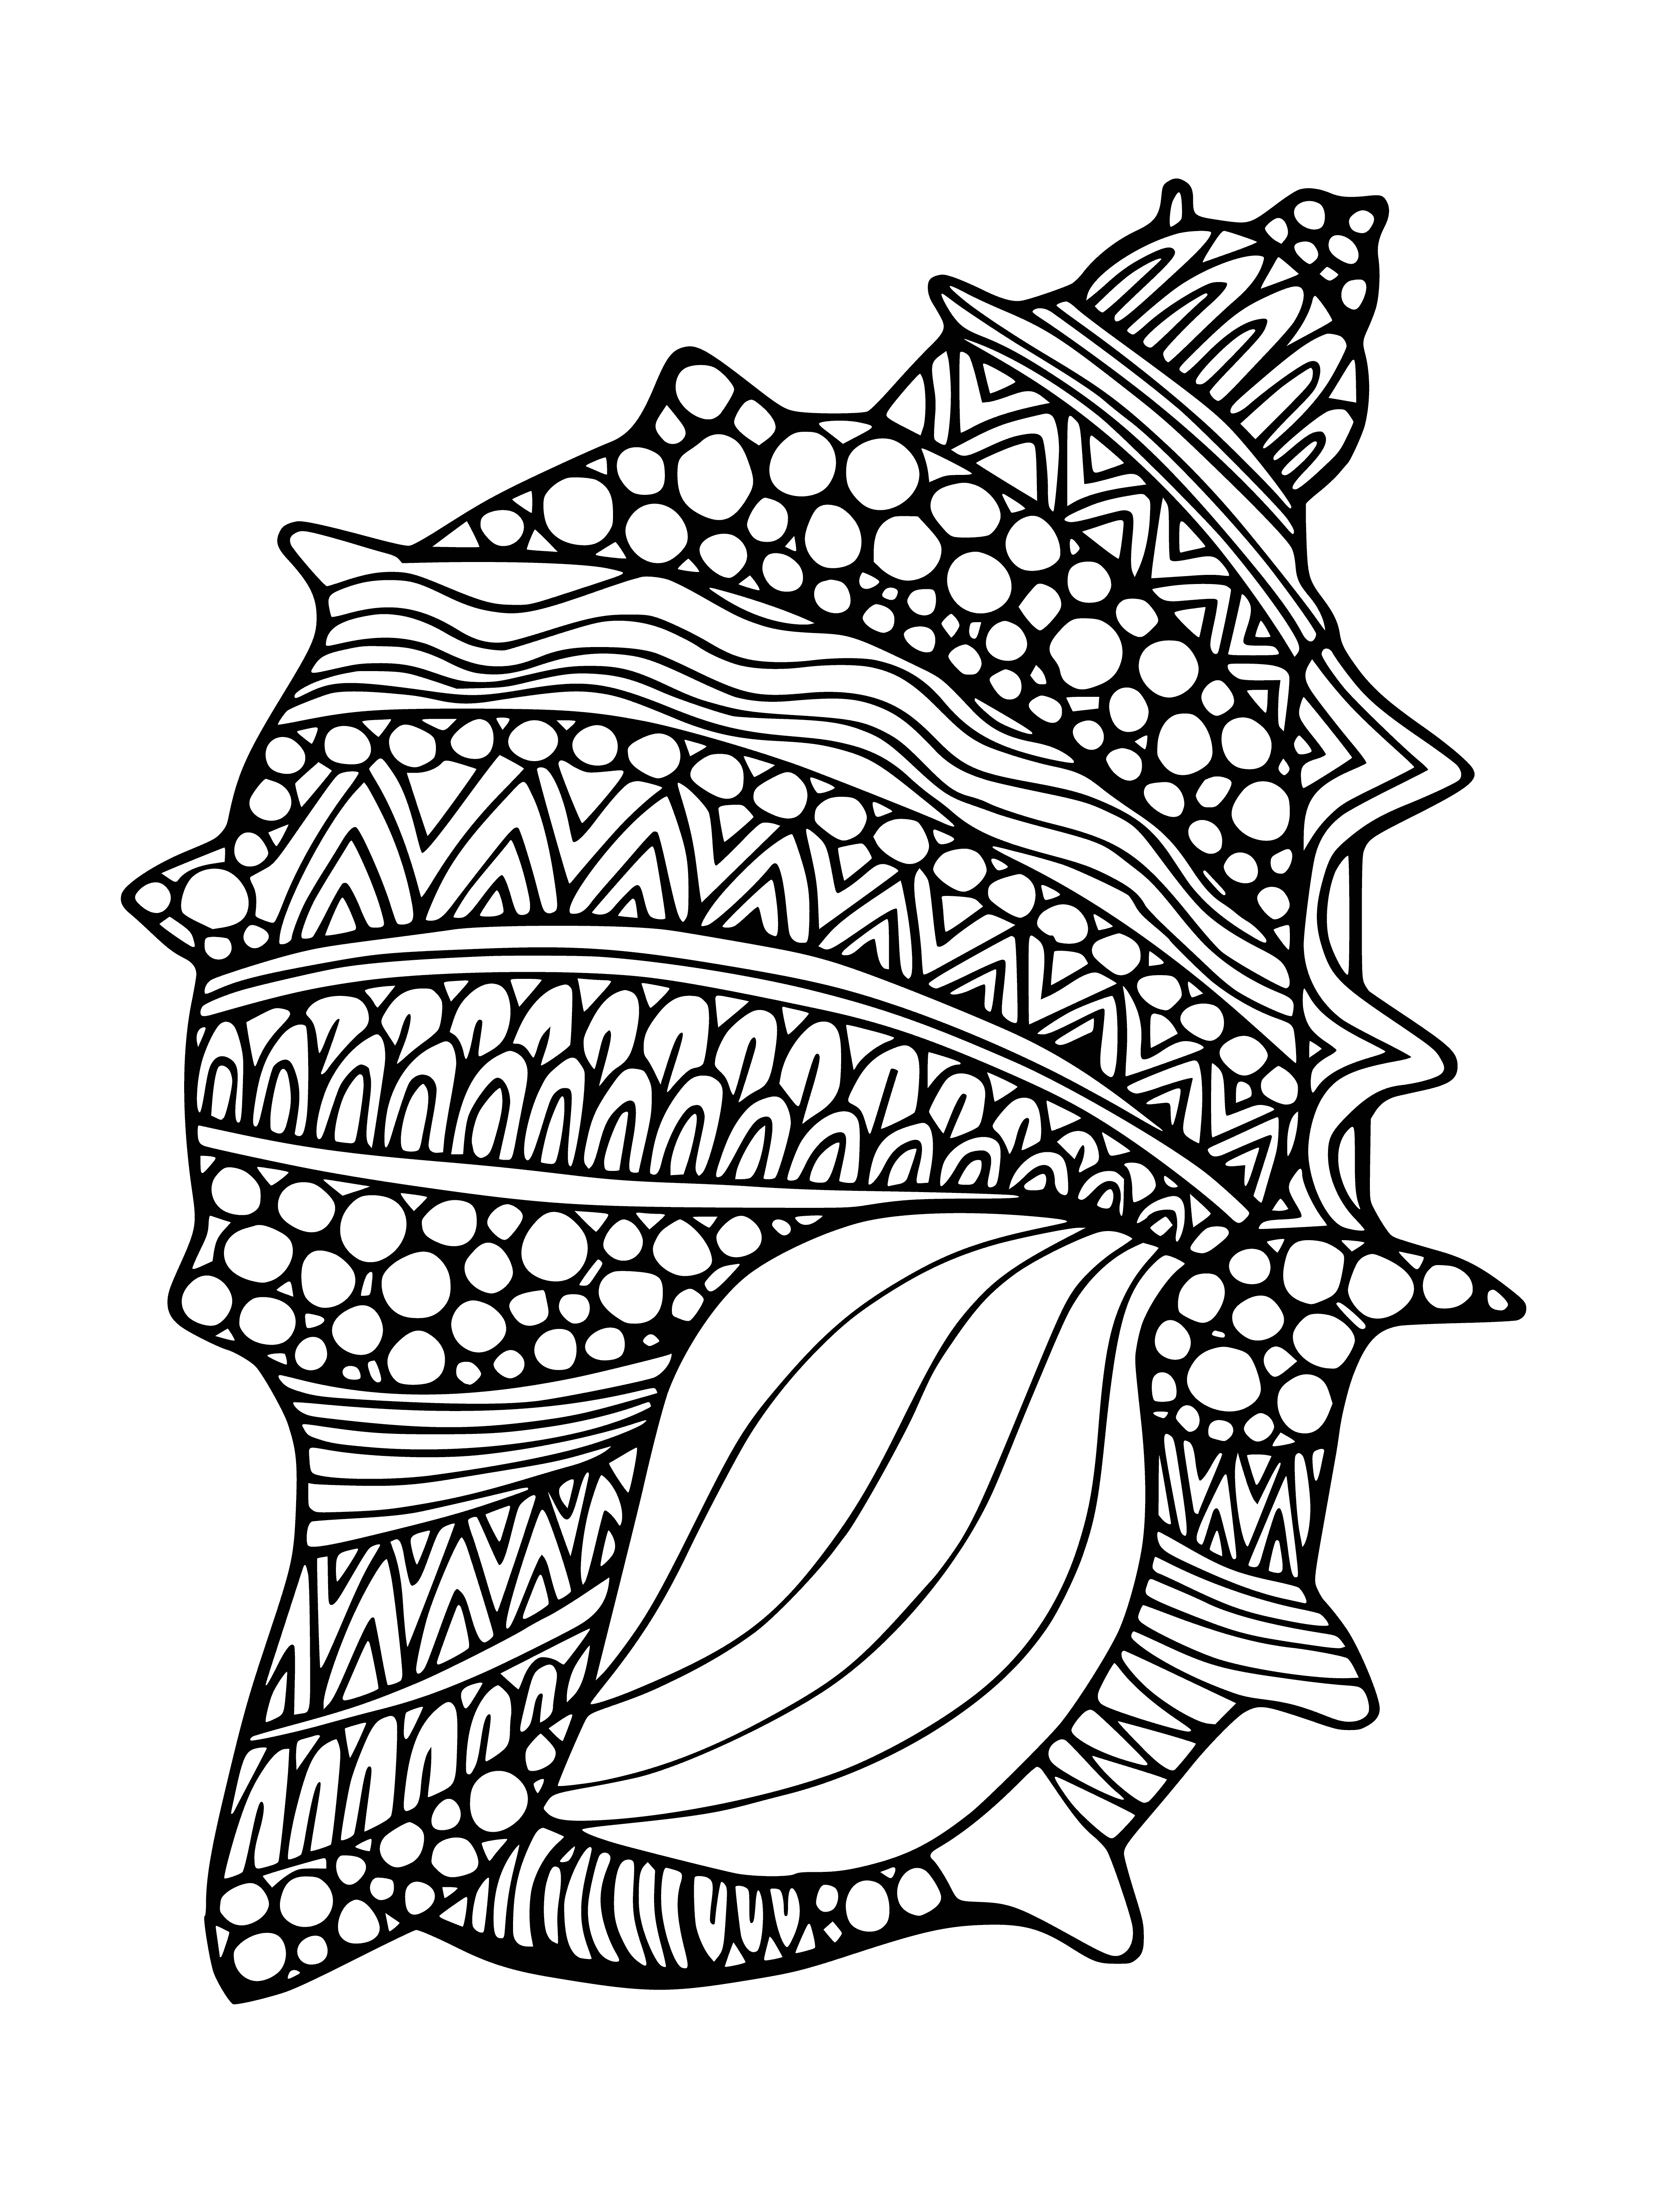 coloring page: illustrated ocean scene with conch shell & assorted creatures: starfish, seahorse, fish, & crab in shades of pink, purple, blue & green.